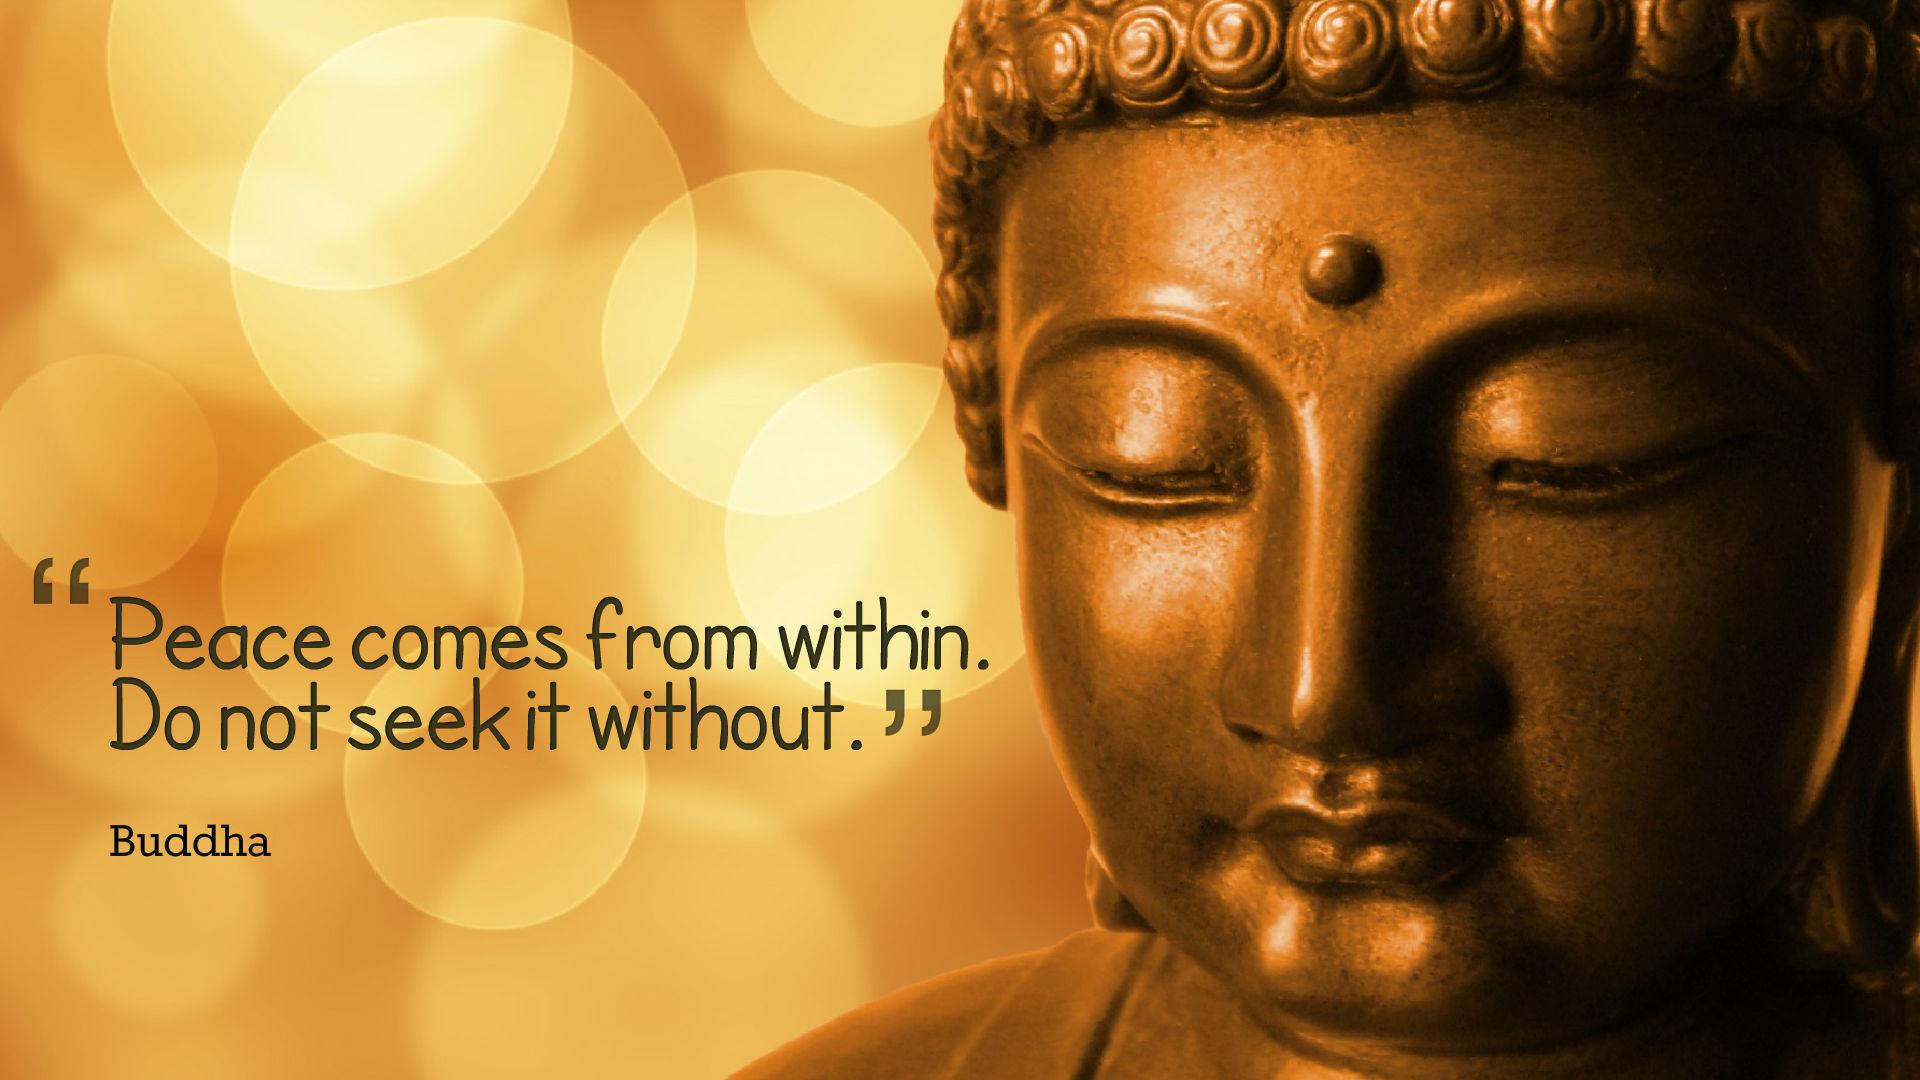 Meditation Quotes Wallpapers - Top Free Meditation Quotes Backgrounds ...